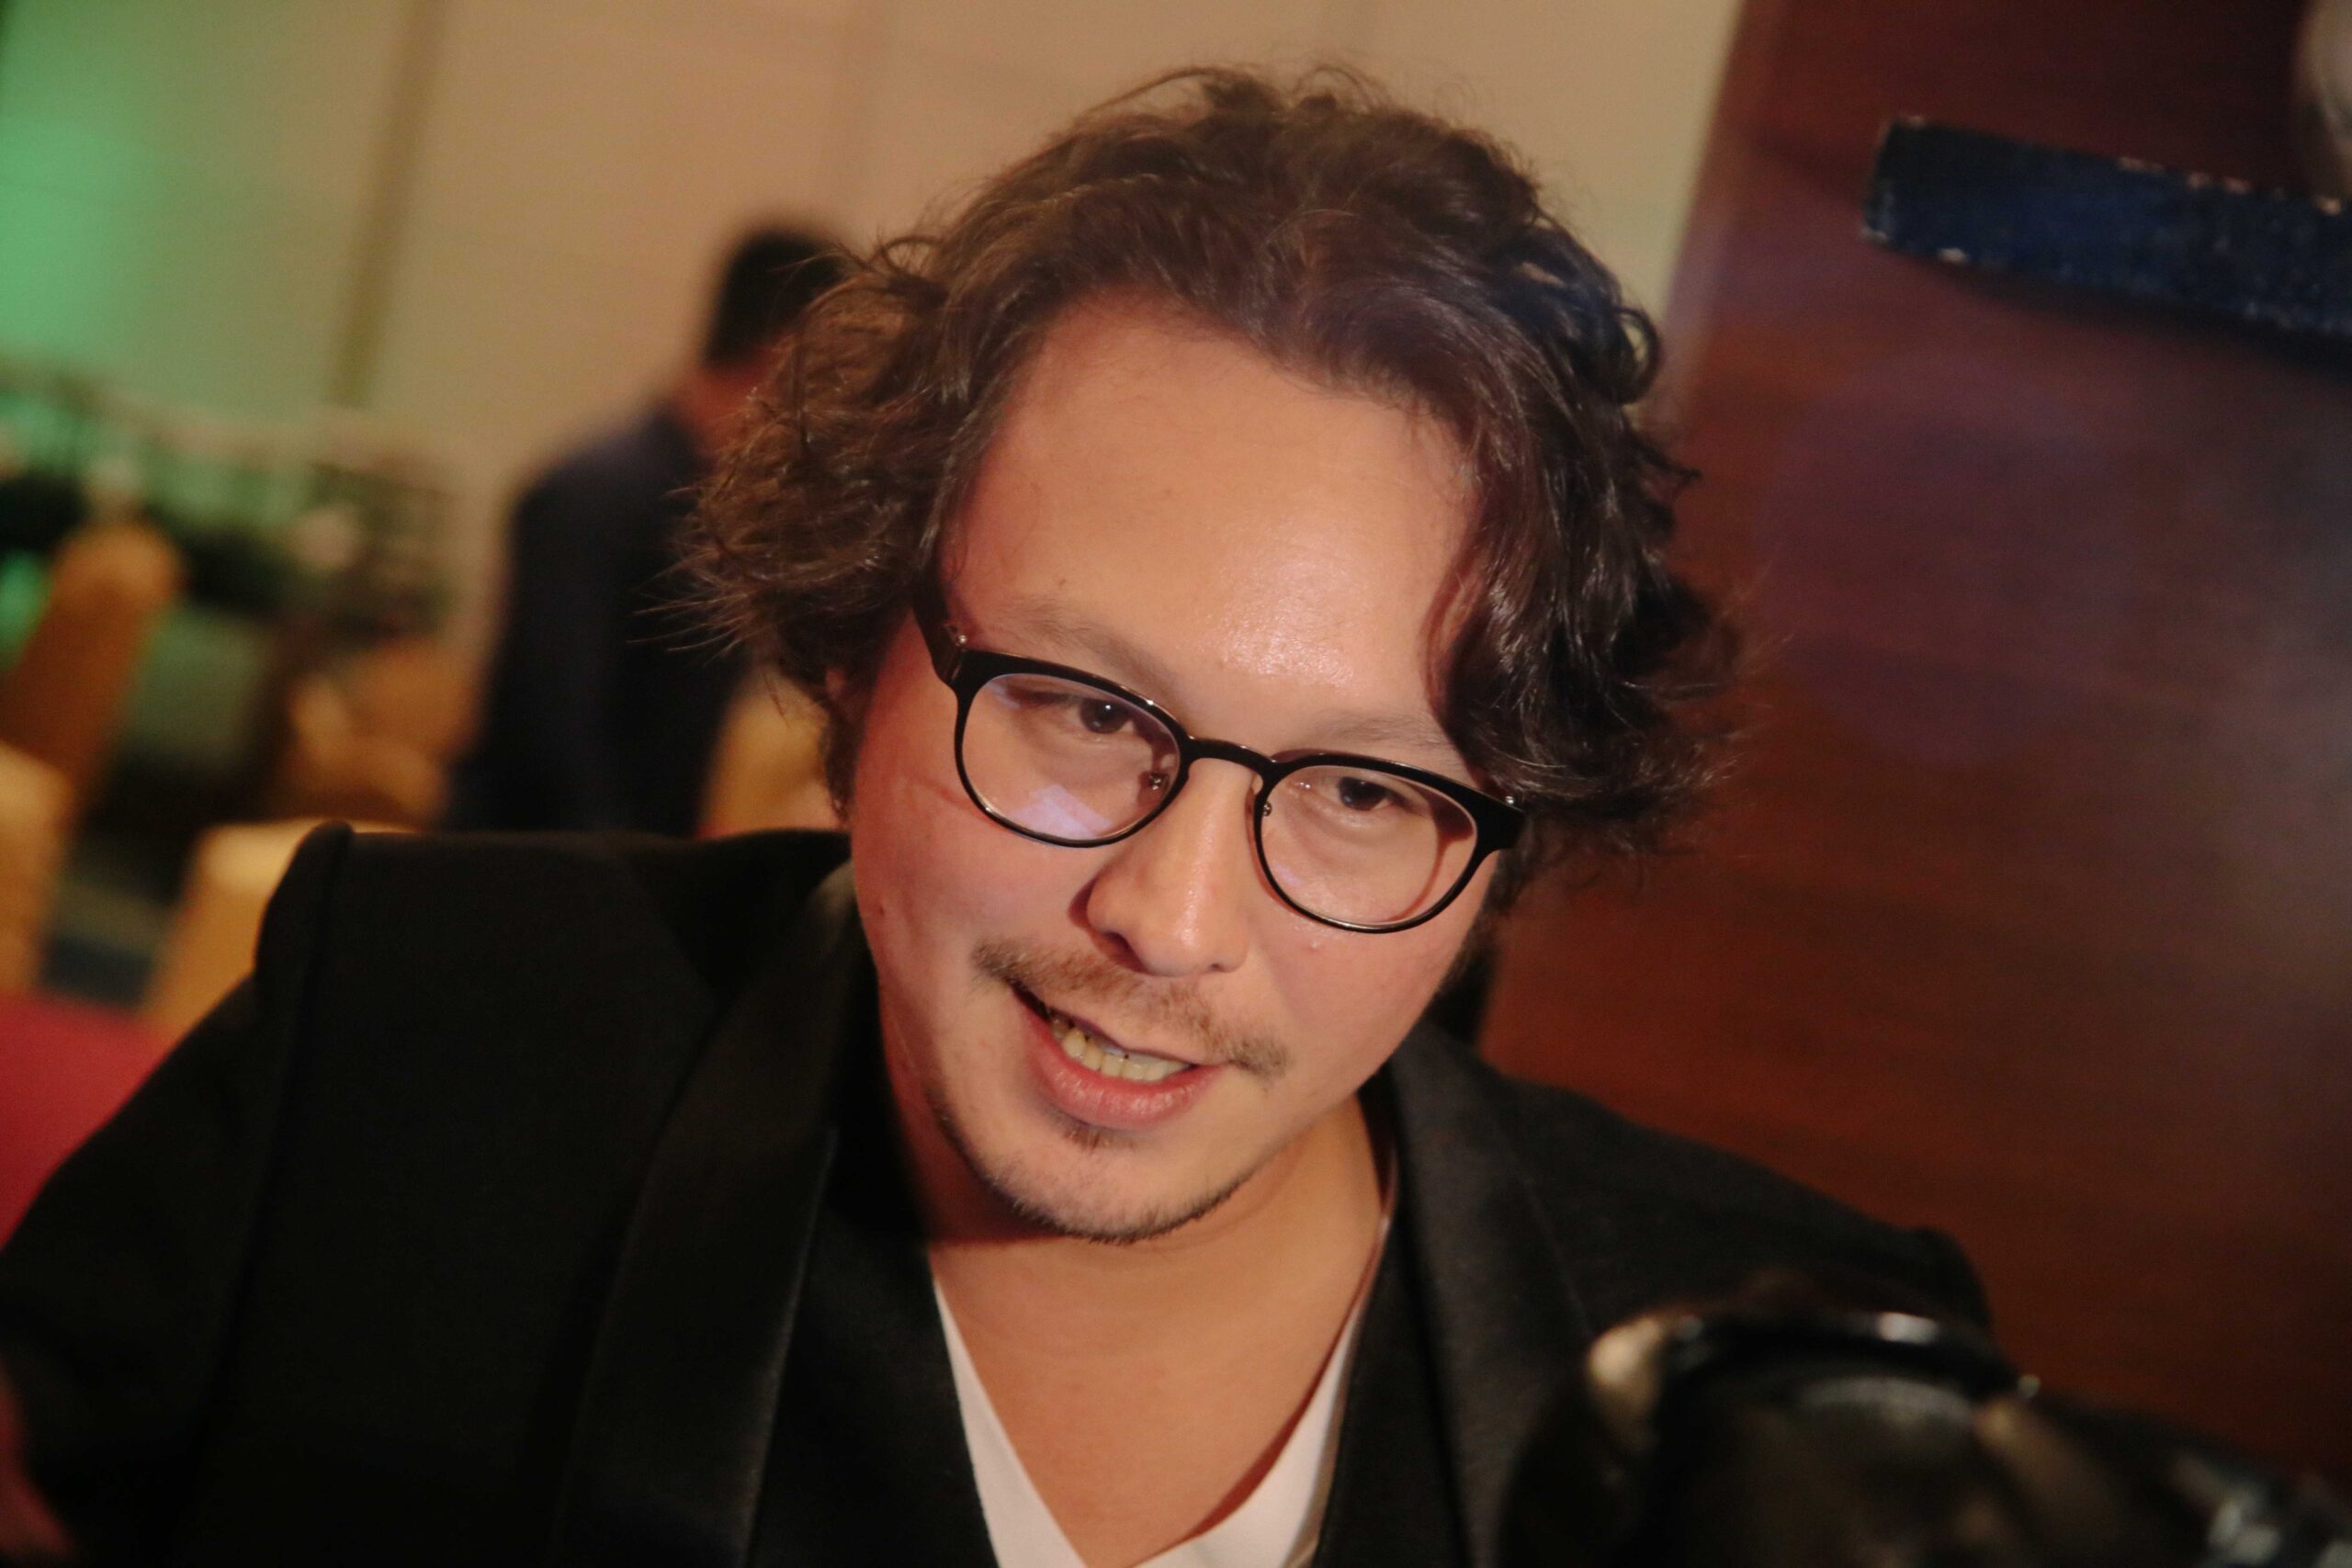 Baron Geisler on being part of ‘Ma’ Rosa,’ viral video incident